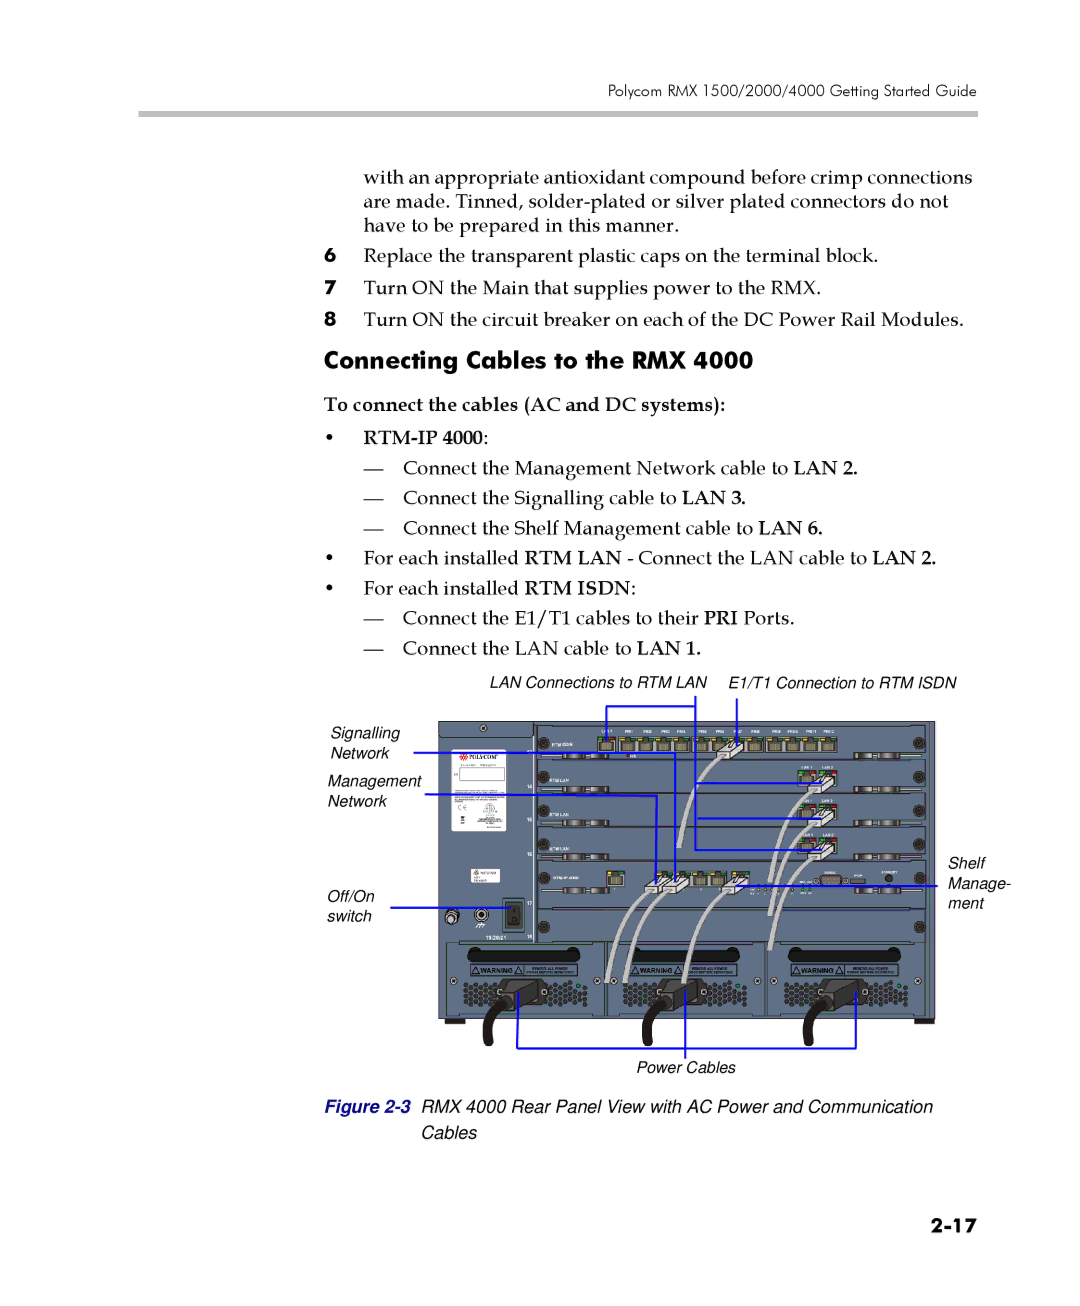 Polycom DOC2560C manual Connecting Cables to the RMX, To connect the cables AC and DC systems RTM-IP 